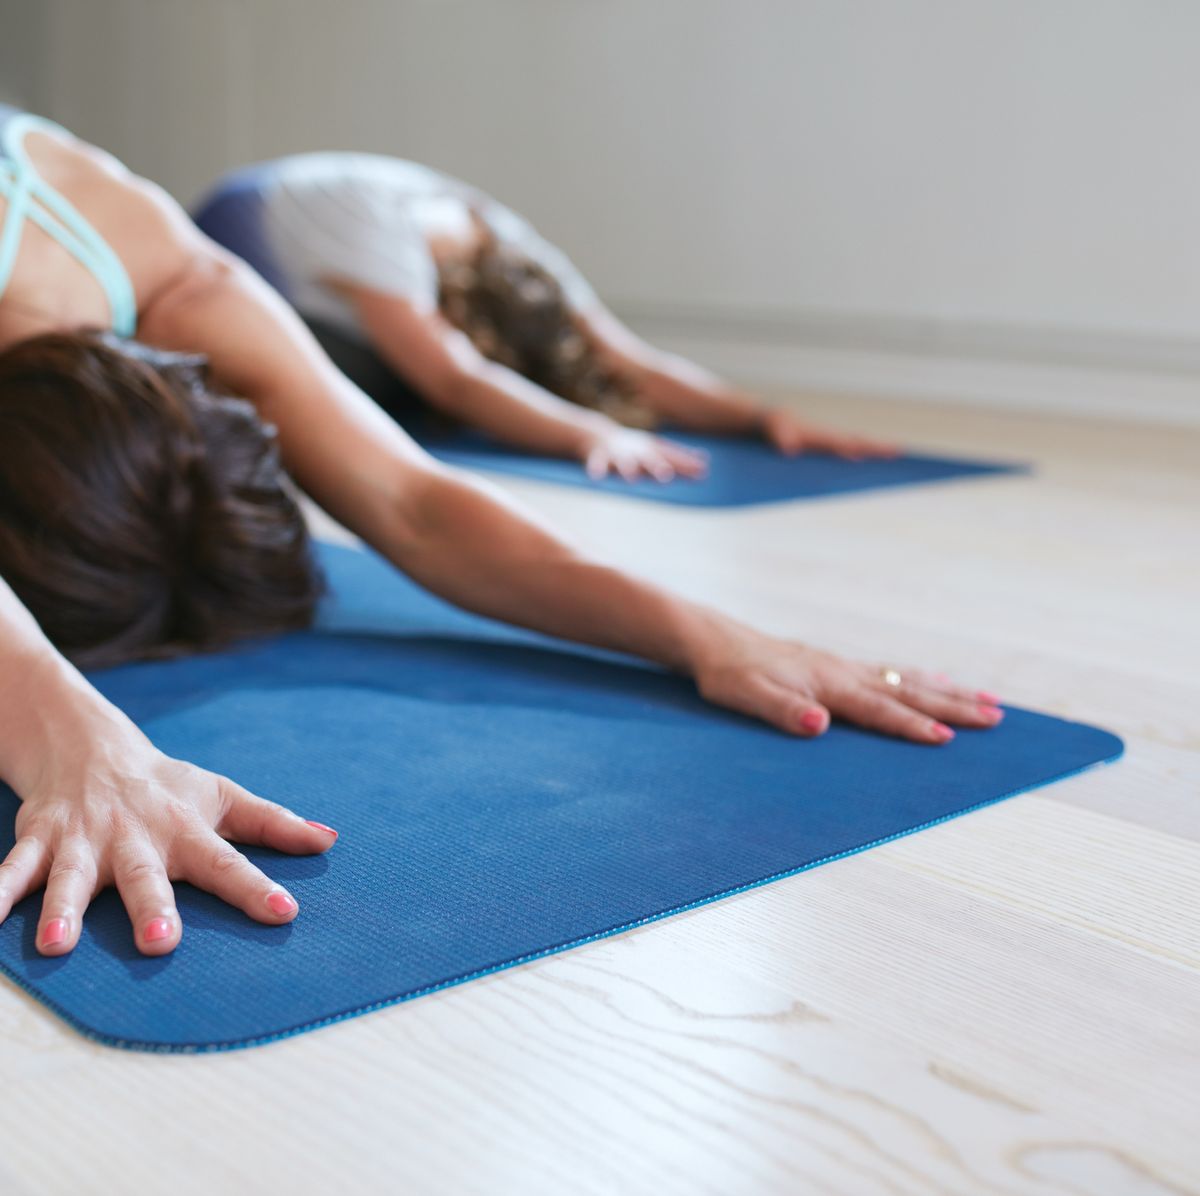 Why you should consider yoga for your daily practice